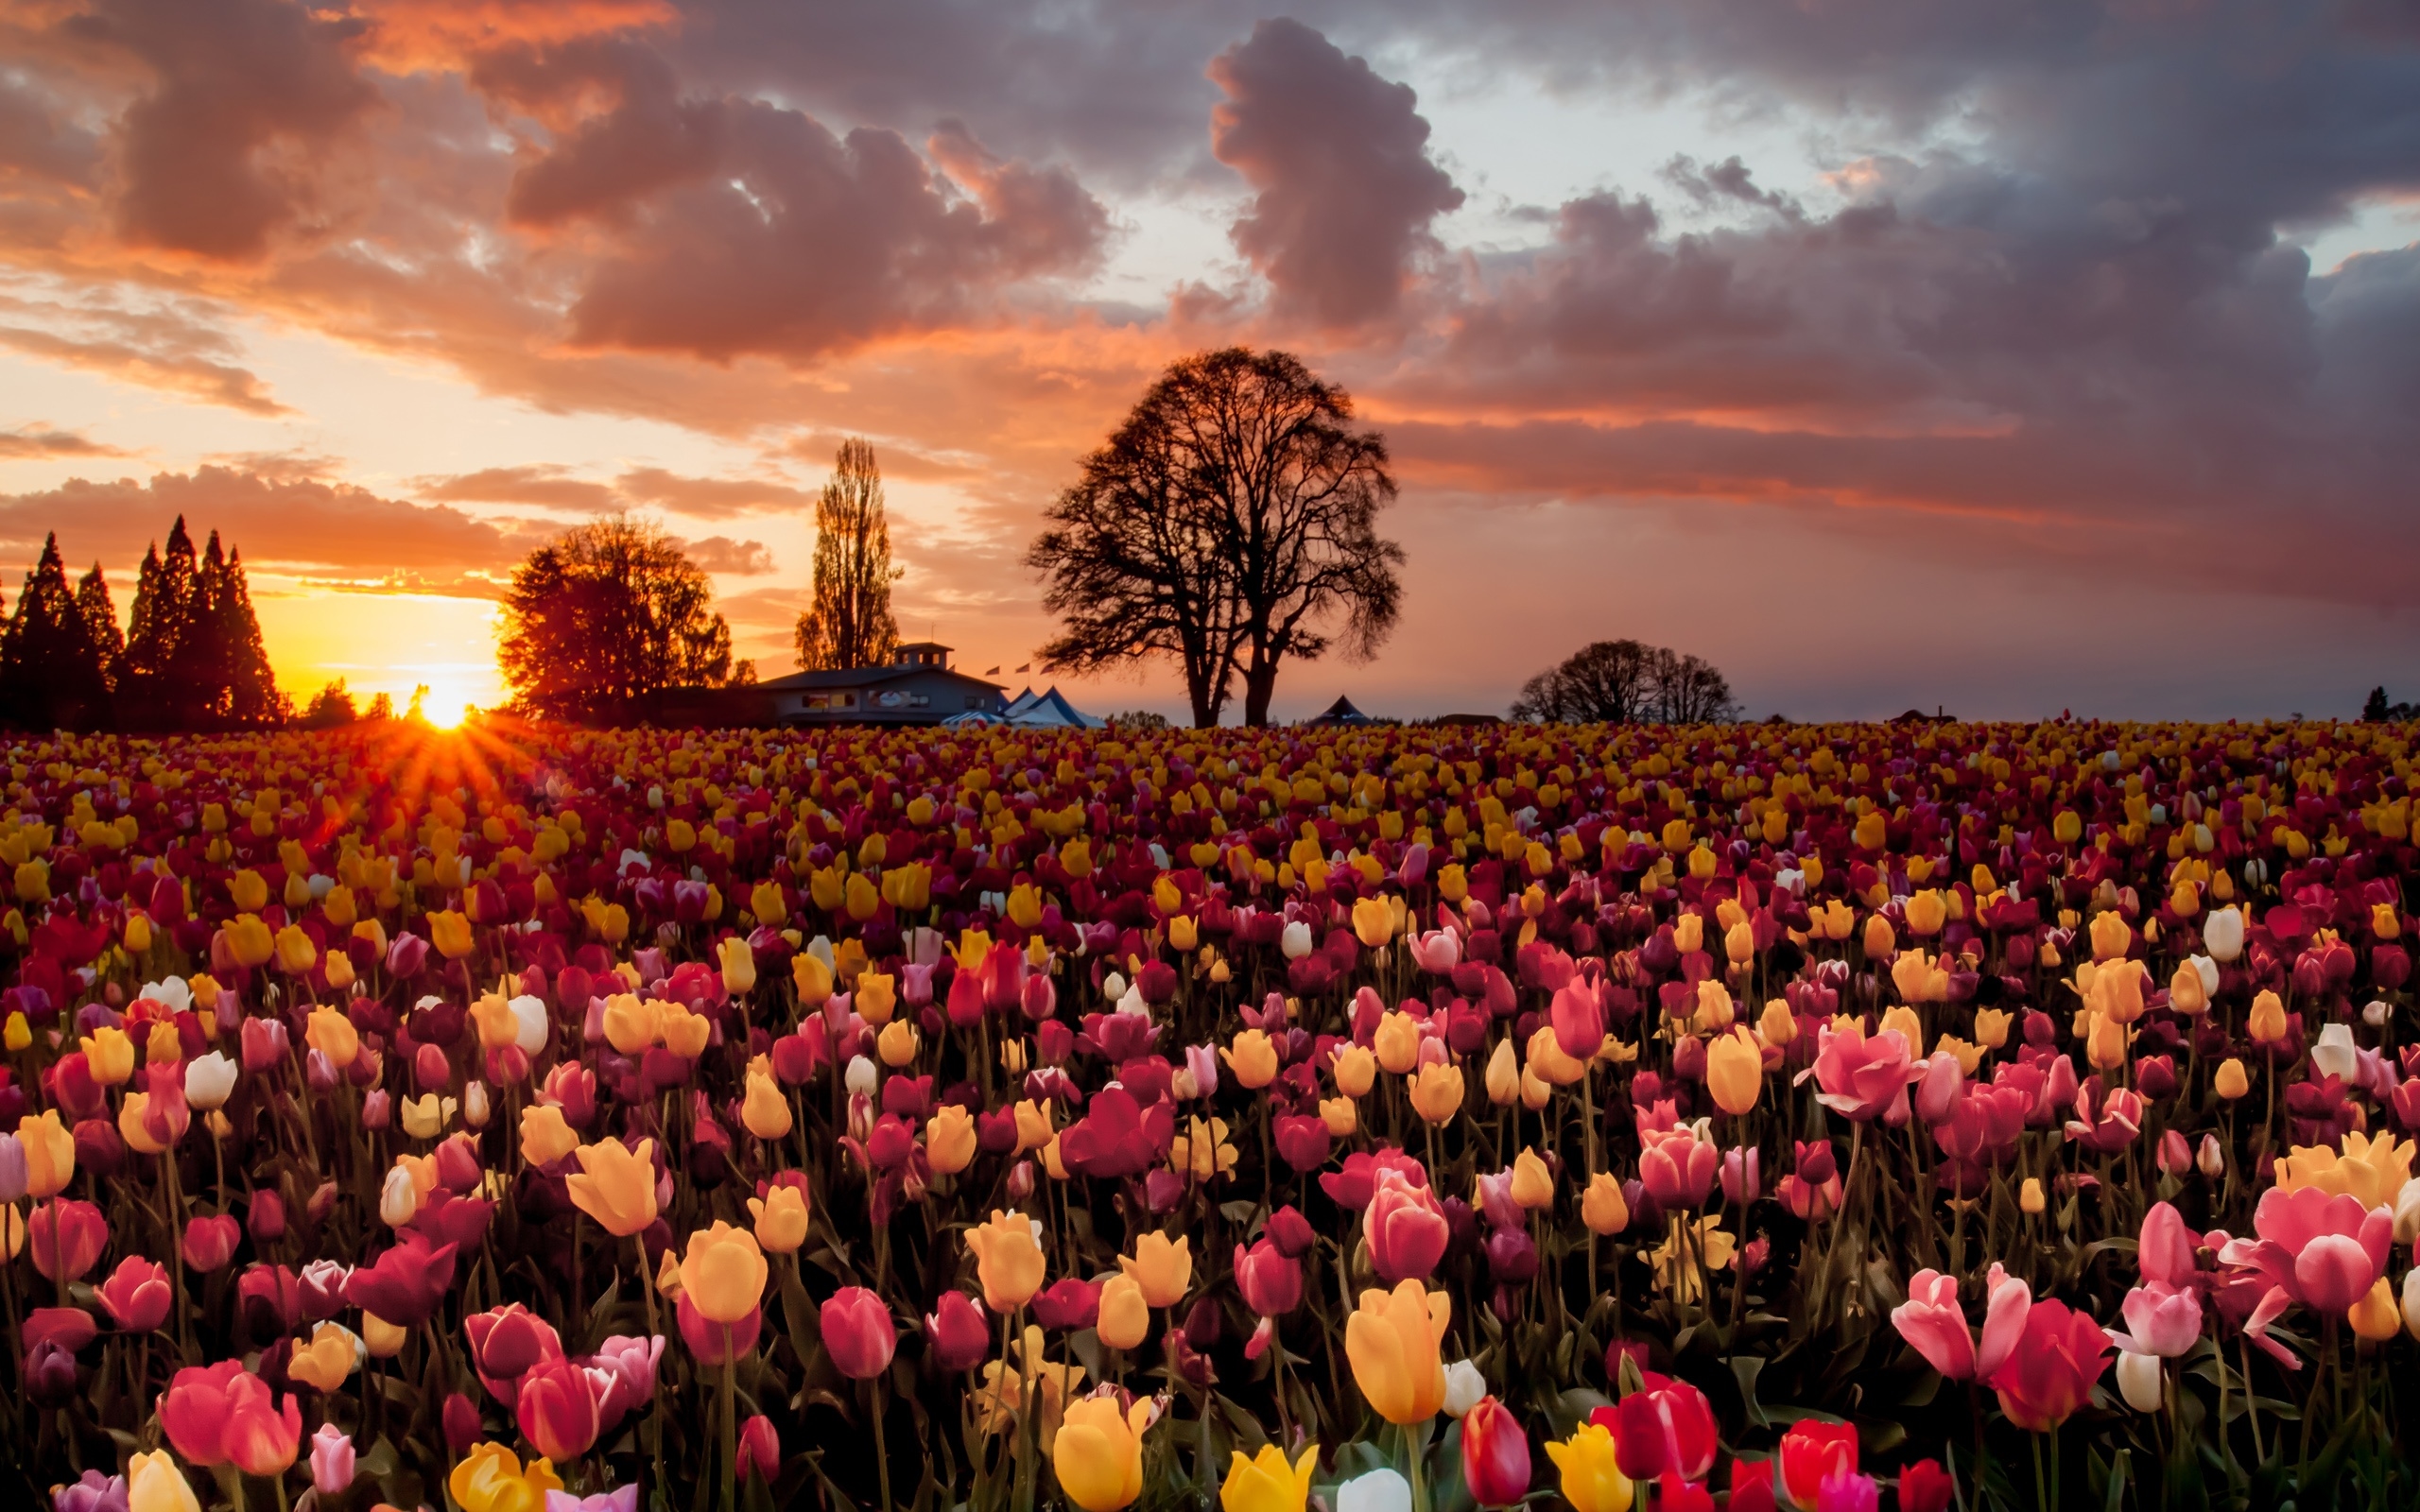 Tulips Flowers Field Trees Farm Orange Sky with gorgeous Red Clouds